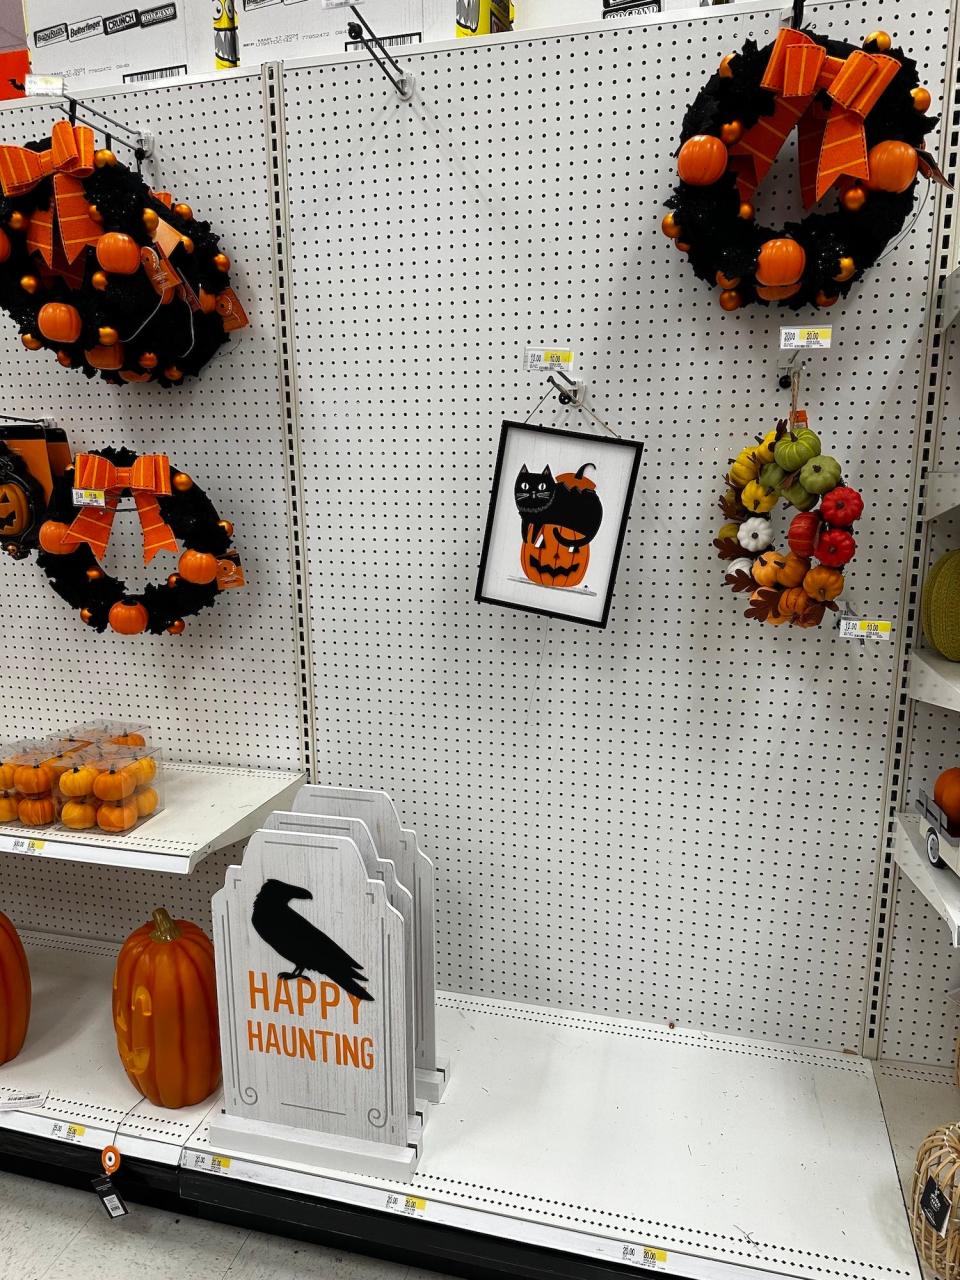 Halloween decorations at Target in October 2023.